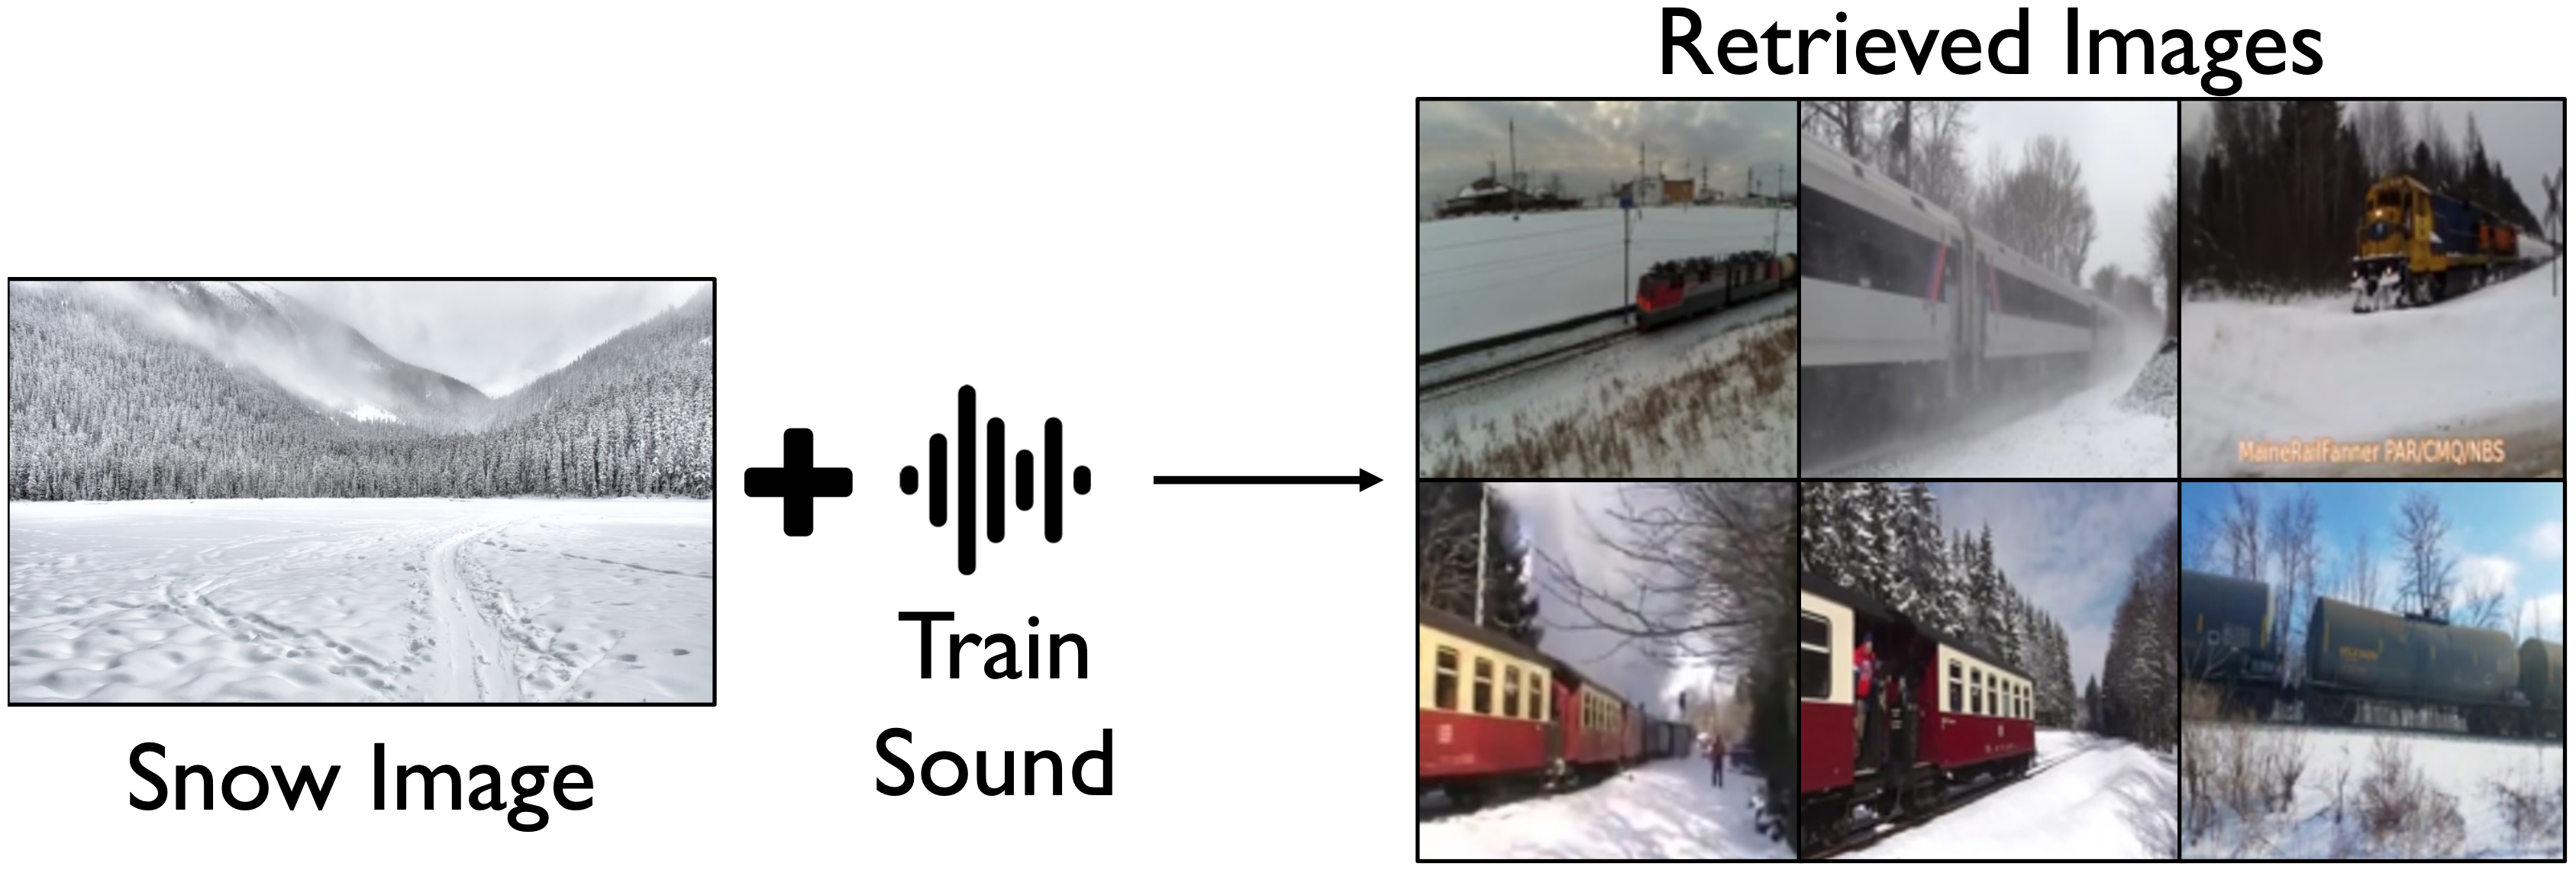 Aligning Sight and Sound: Advanced Sound Source Localization Through Audio-Visual Alignment